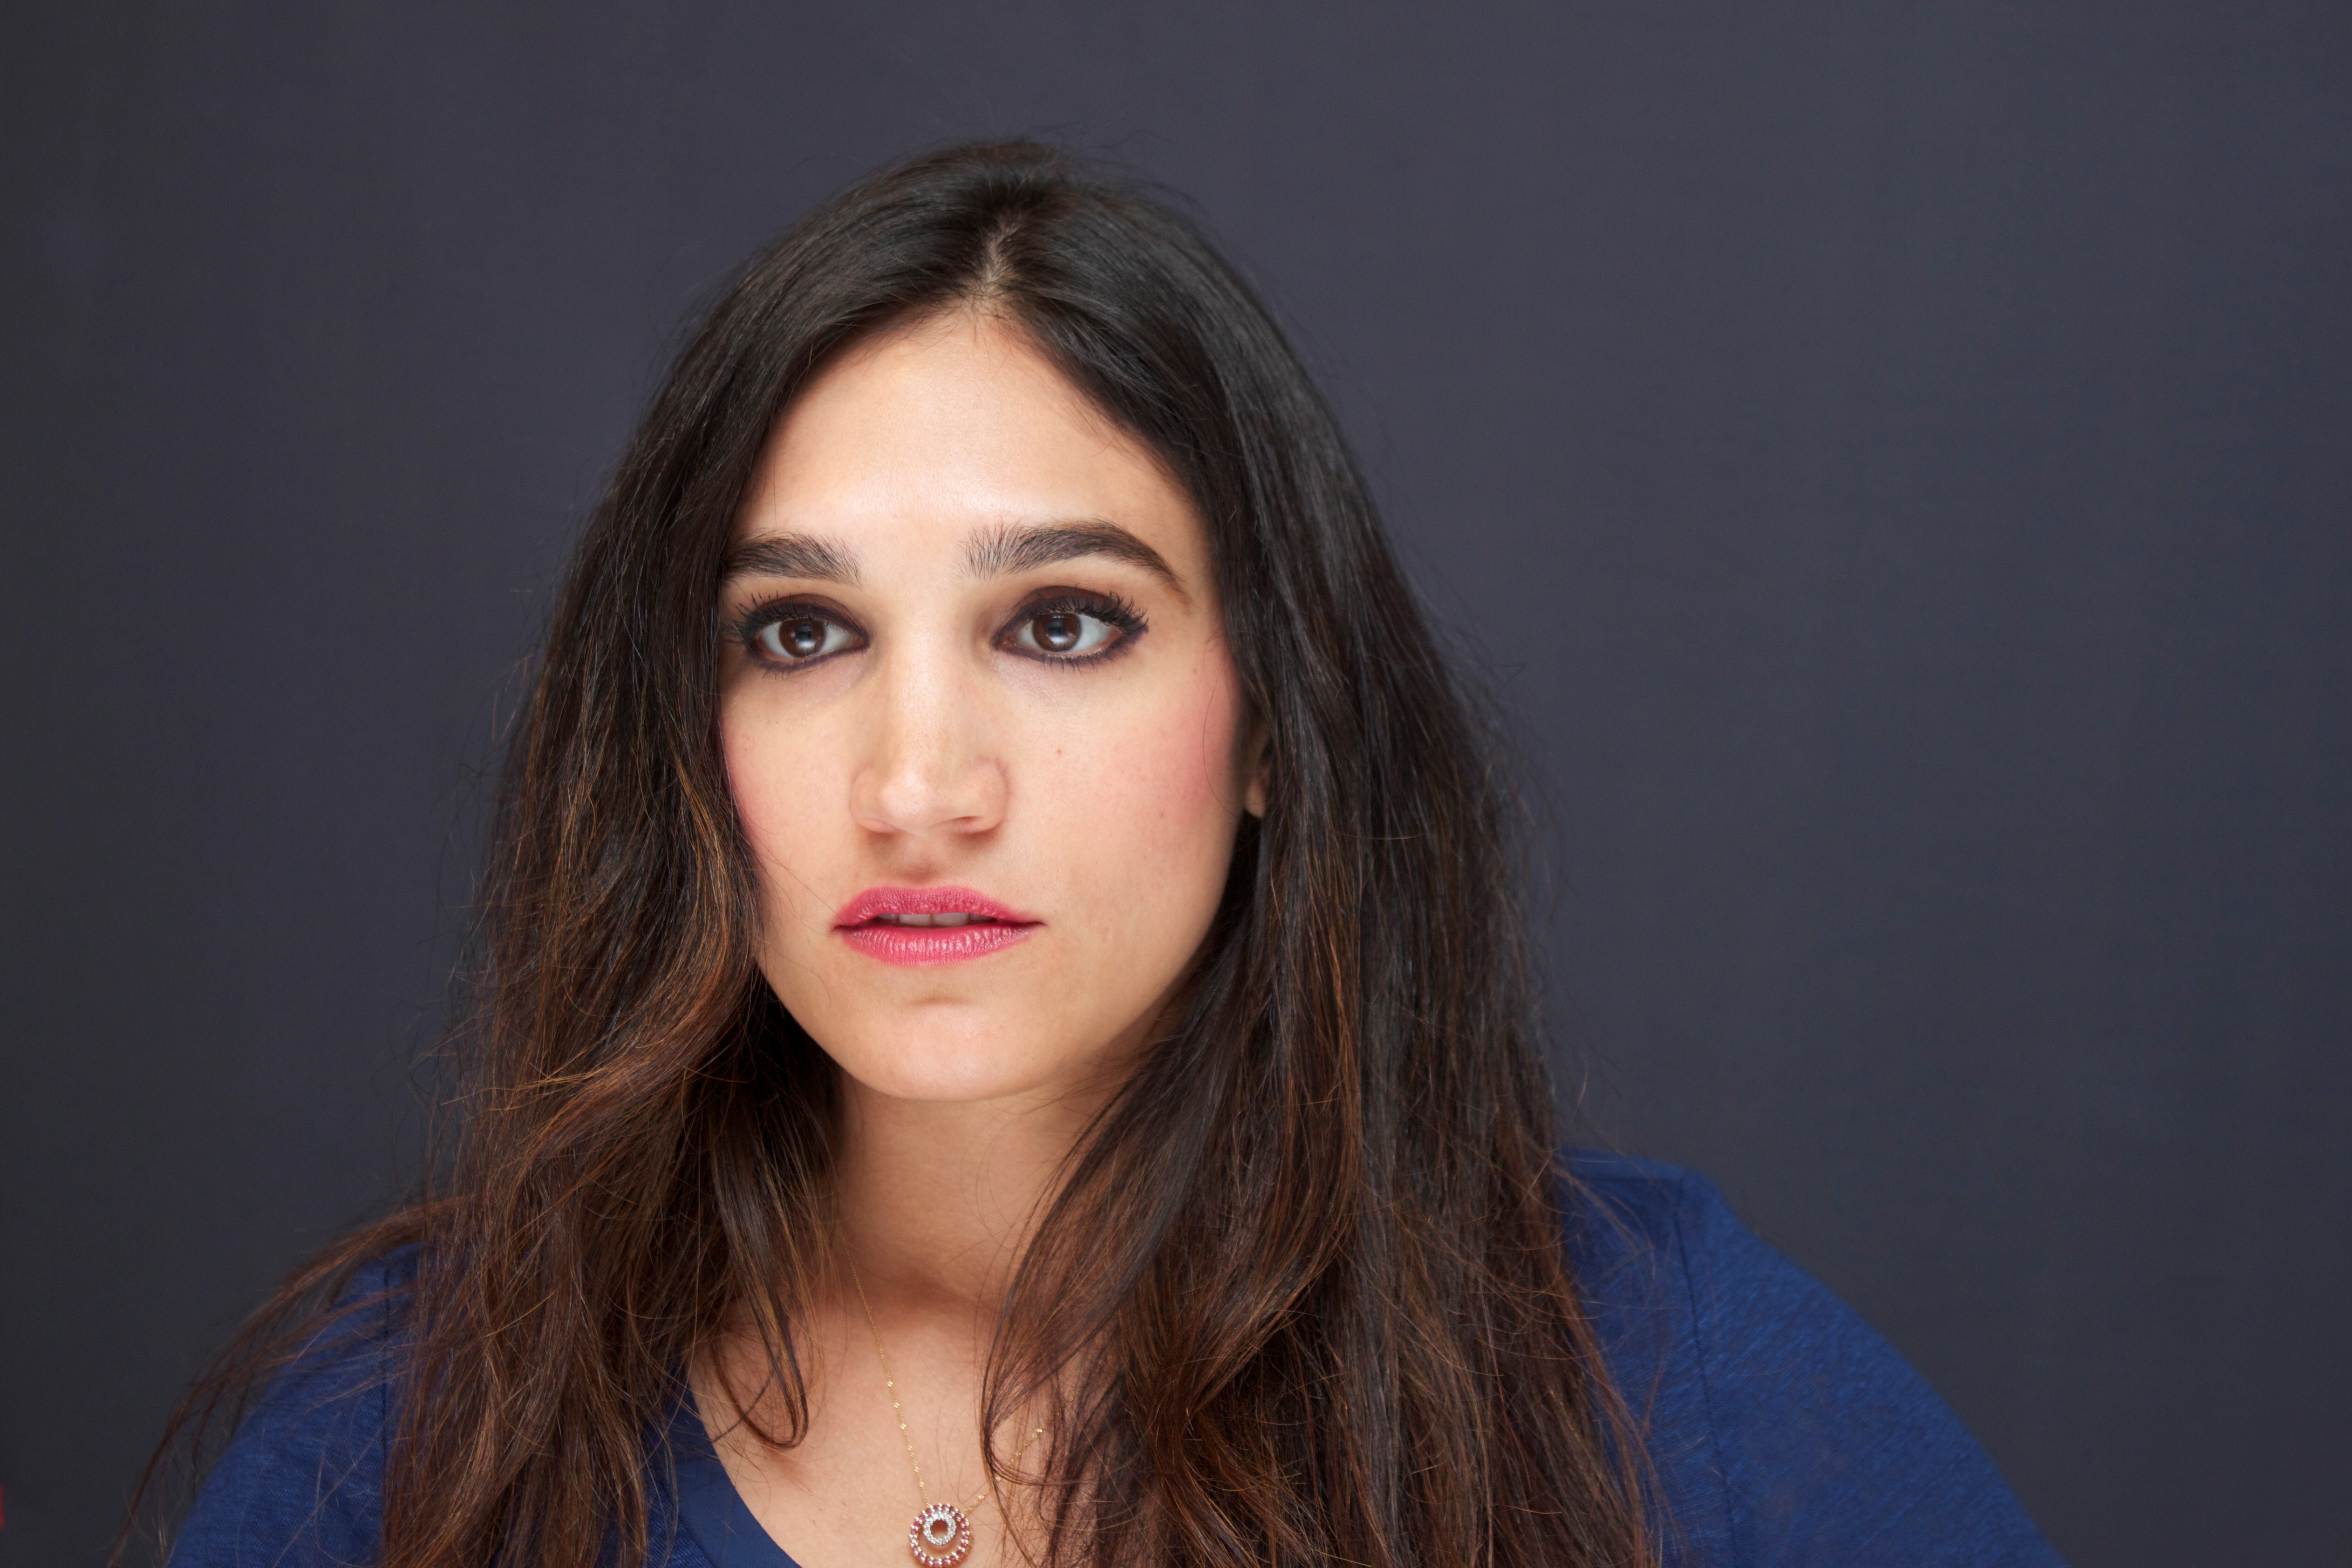 My Ethnically Ambiguous Looks Helped Me Succeed In Acting